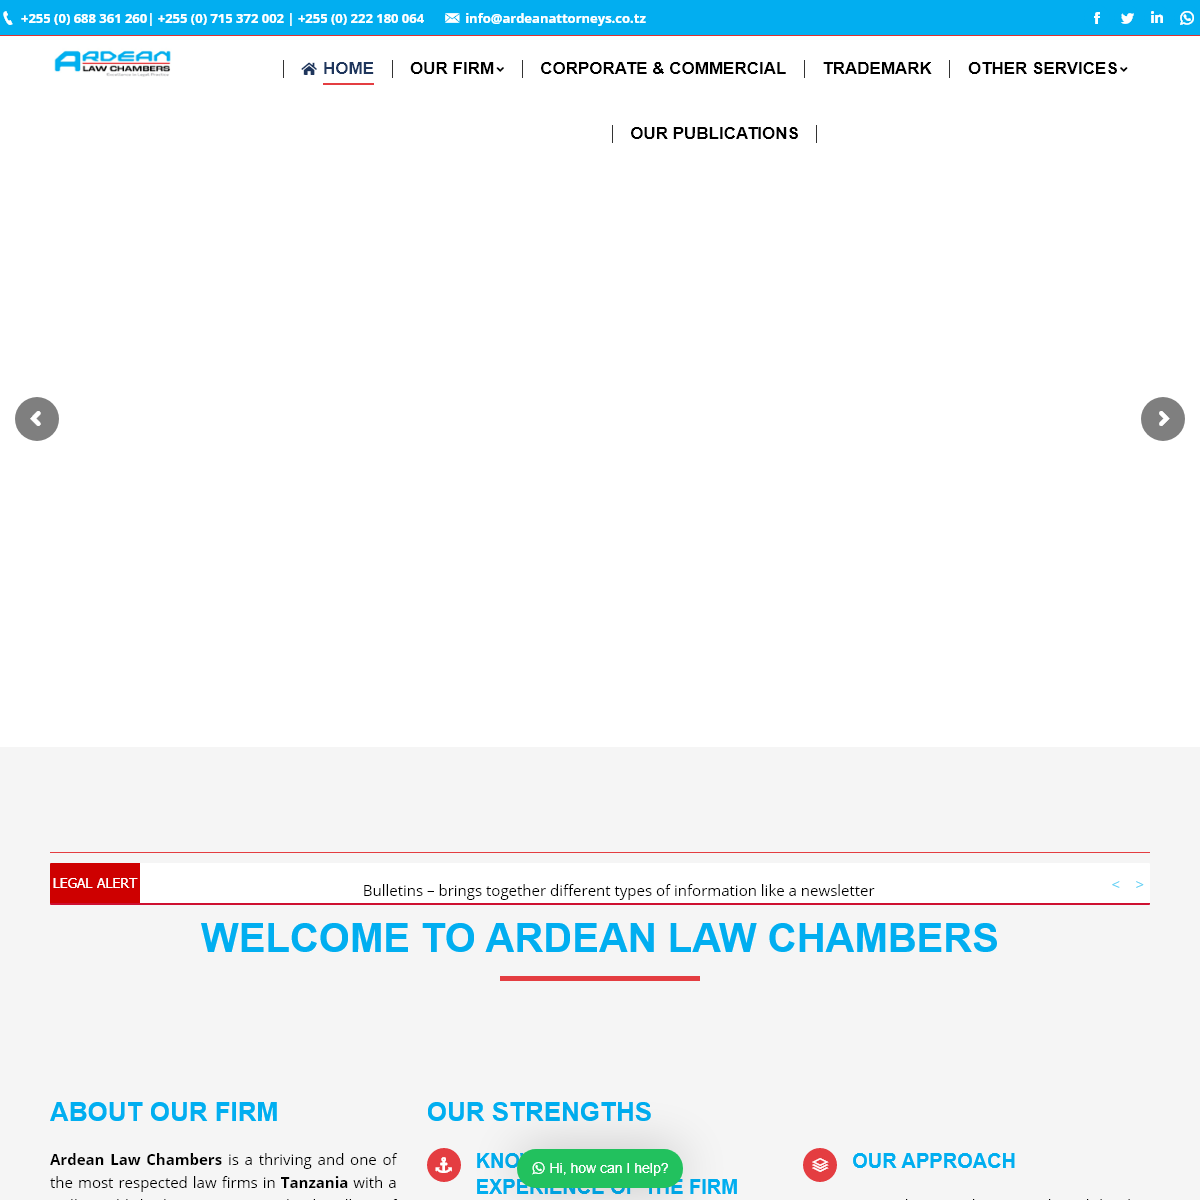 A complete backup of ardeanattorneys.co.tz